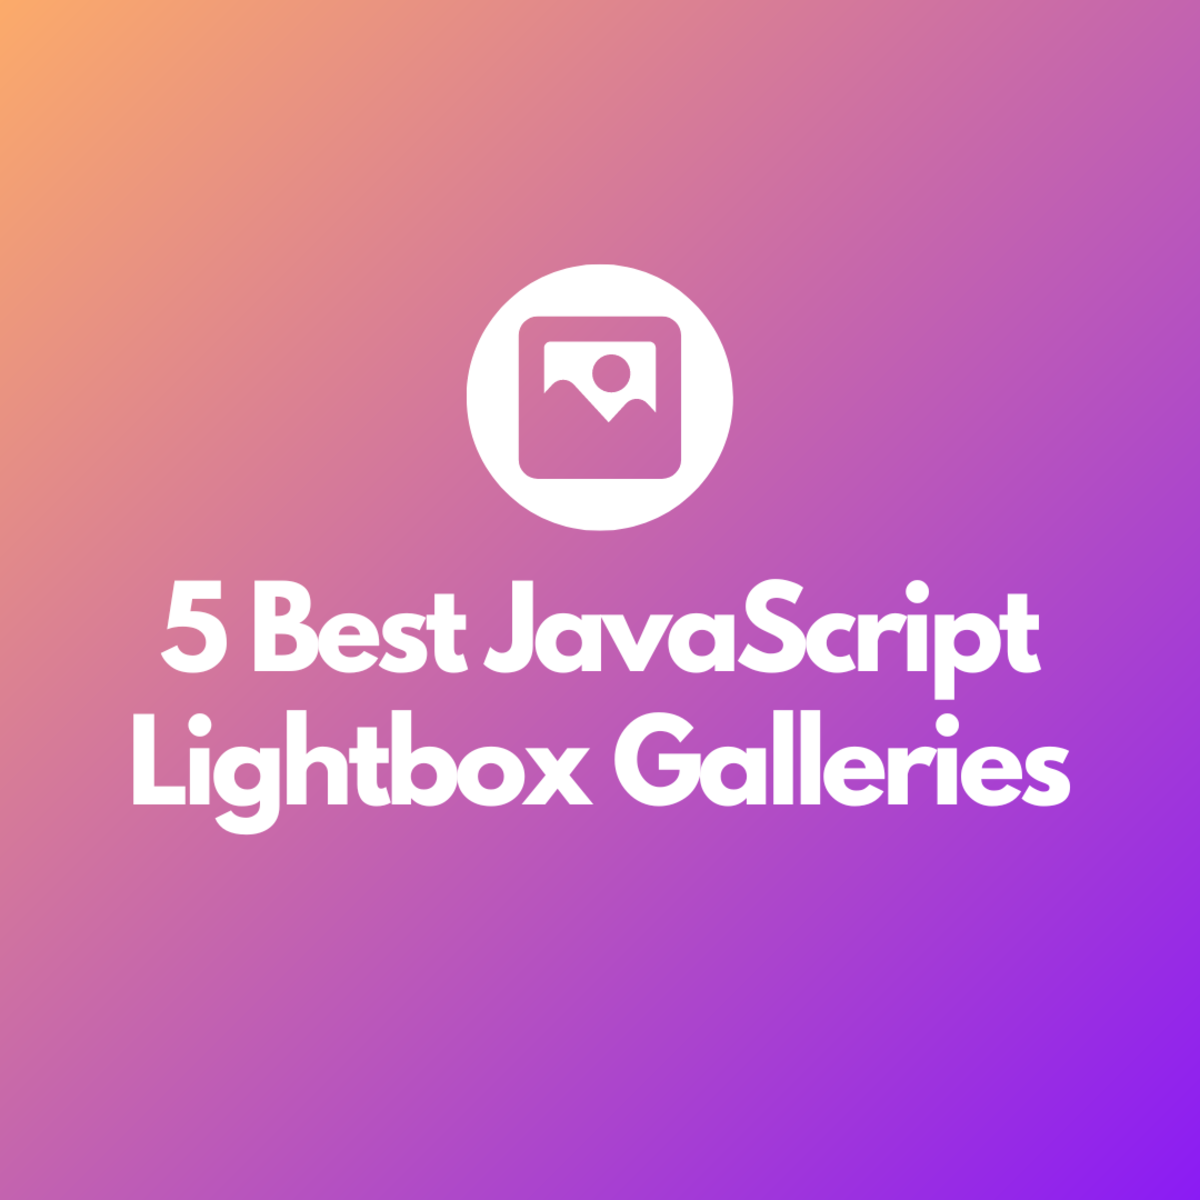 Discover some of the best JavaScript lightbox galleries out there in this ultimate list!